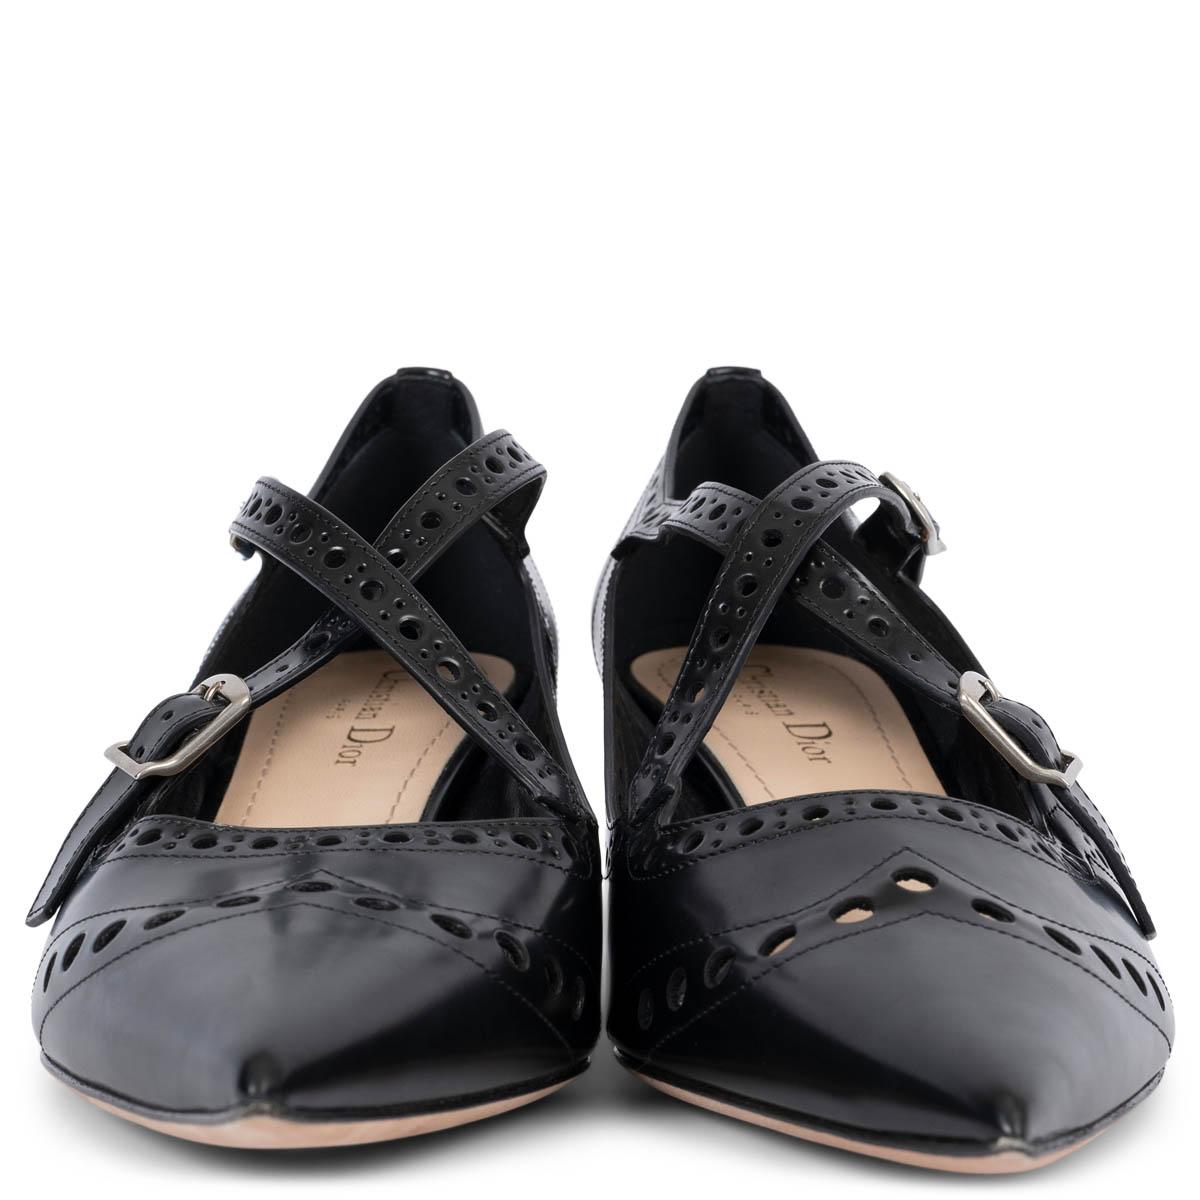 100% authentic Christian Dior 2019 Teddy-D pointed-toe pumps in smooth black leather. The silhouette is upgraded with a perforated brogue-style design throughout and criss cross buckle straps. Brand new. 

Measurements
Imprinted Size	40
Shoe